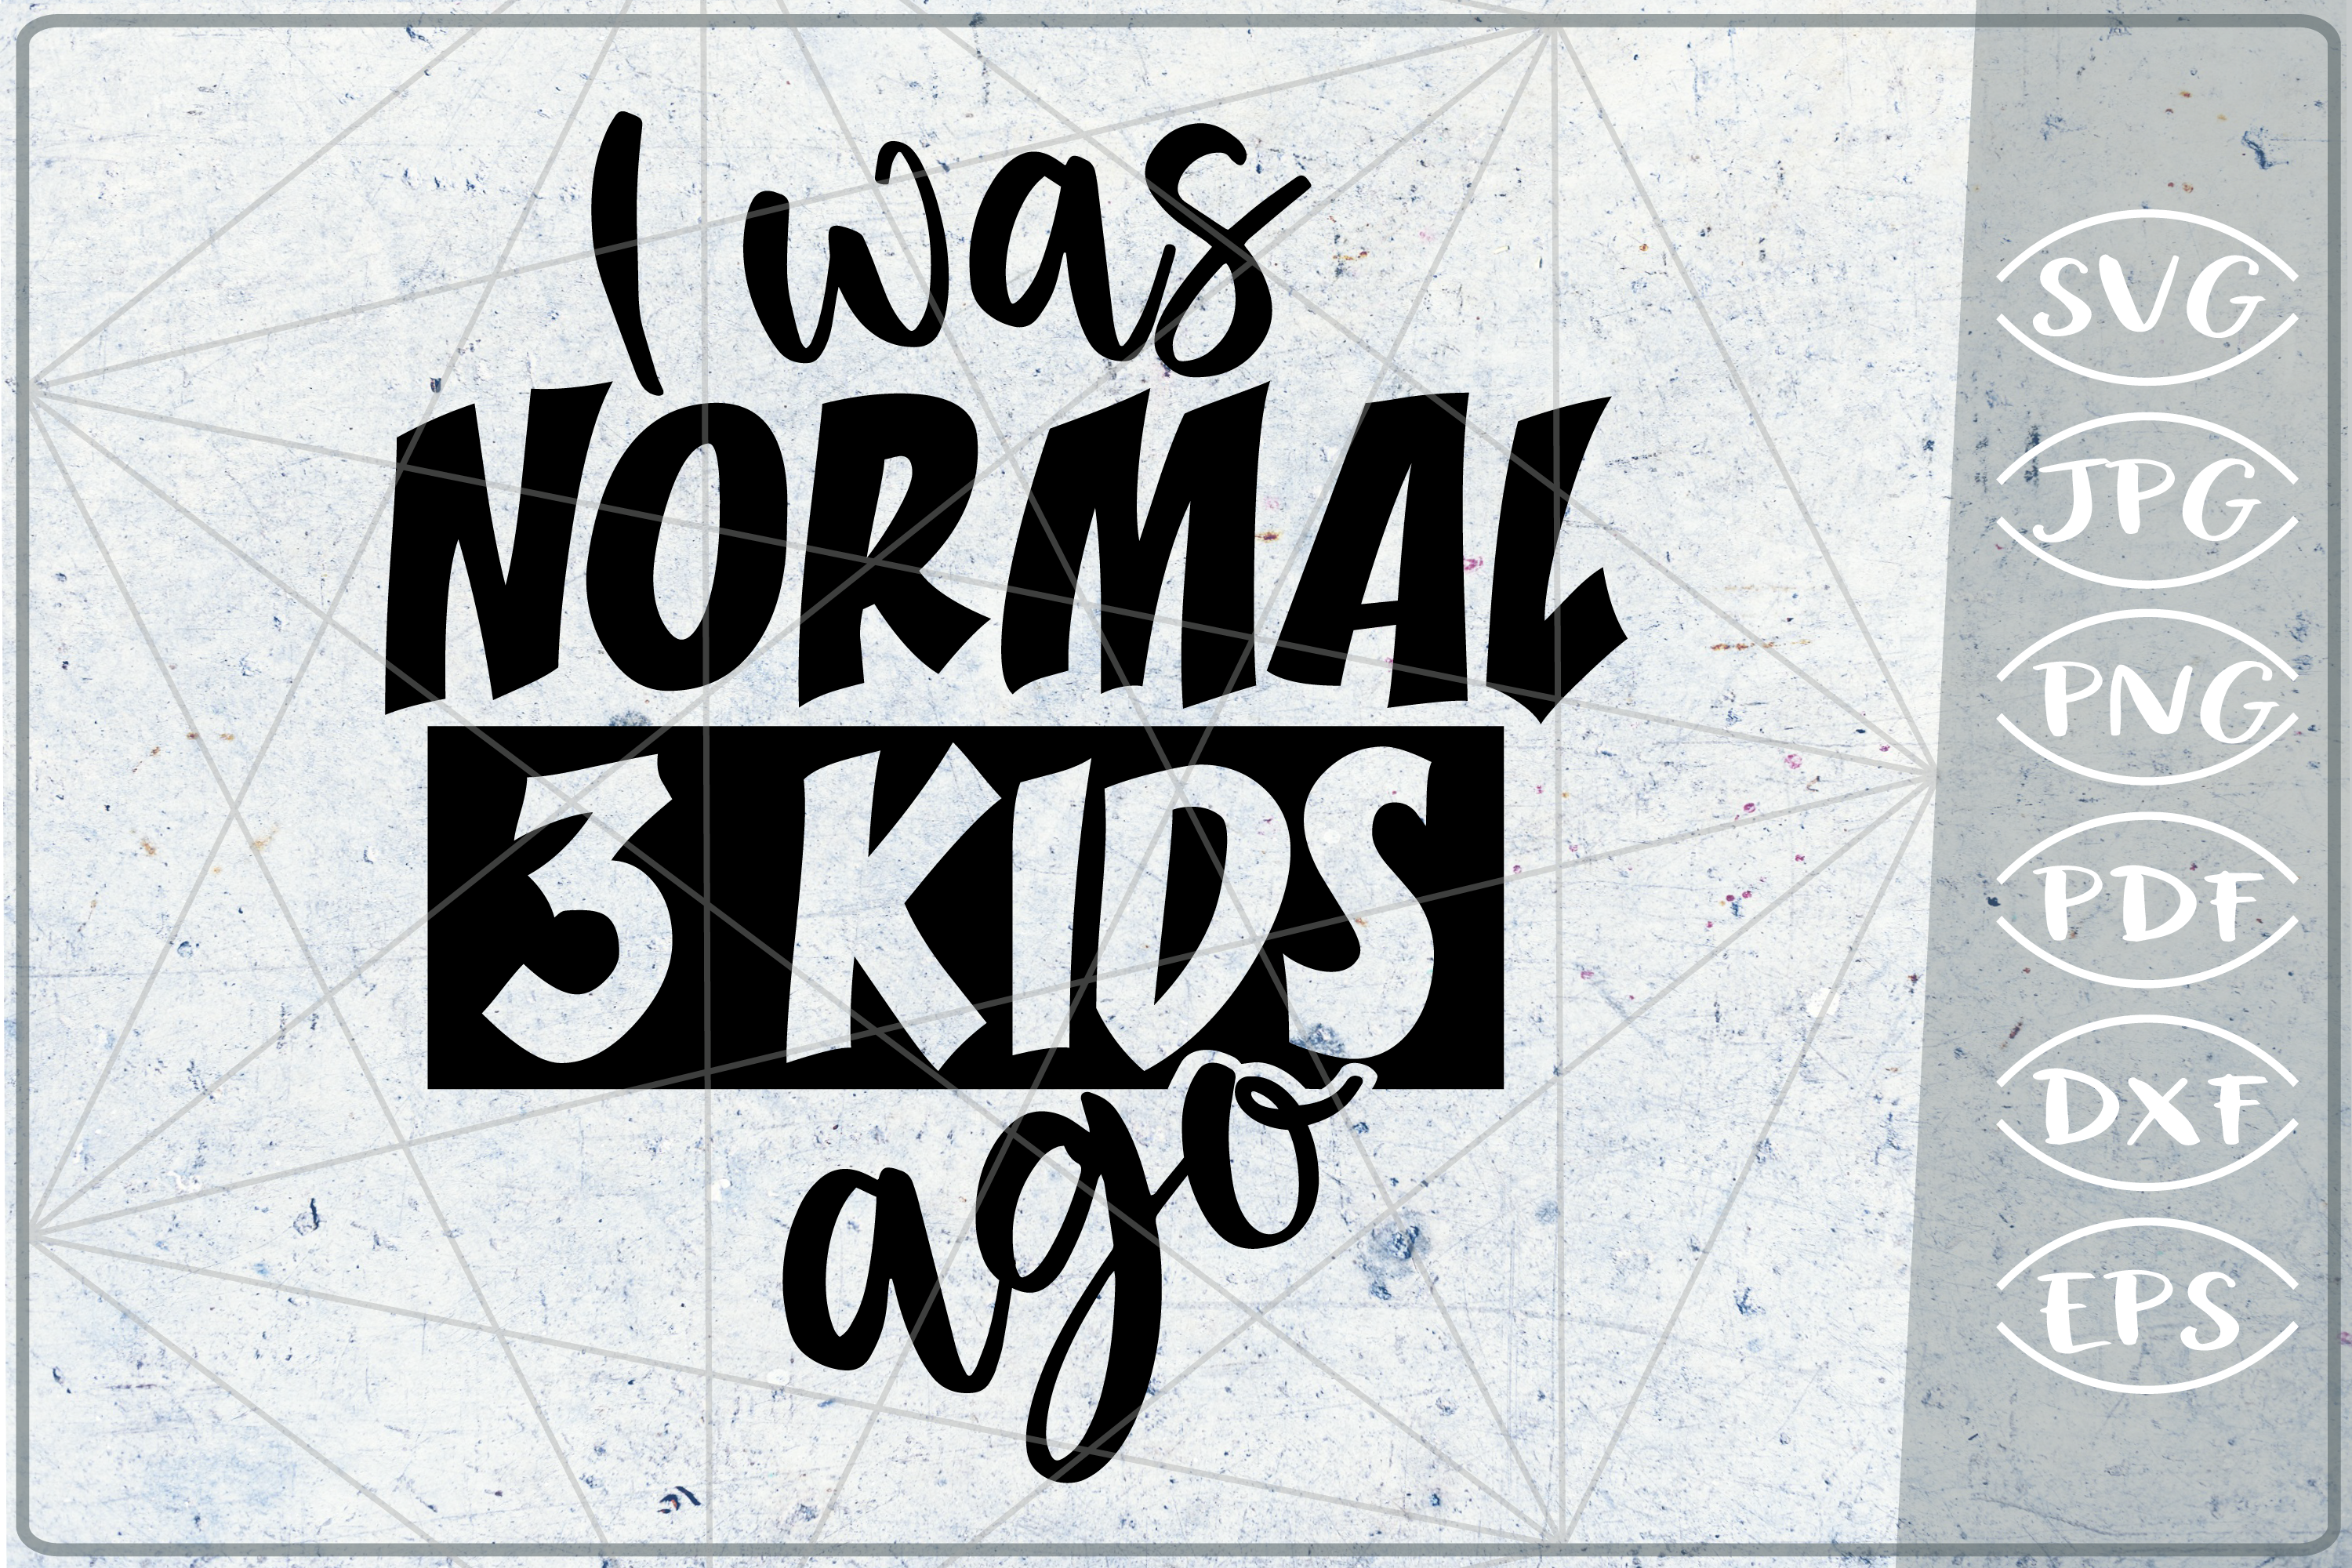 I Was Normal 3 Kids Ago SVG Cutting File - Mom Life ...